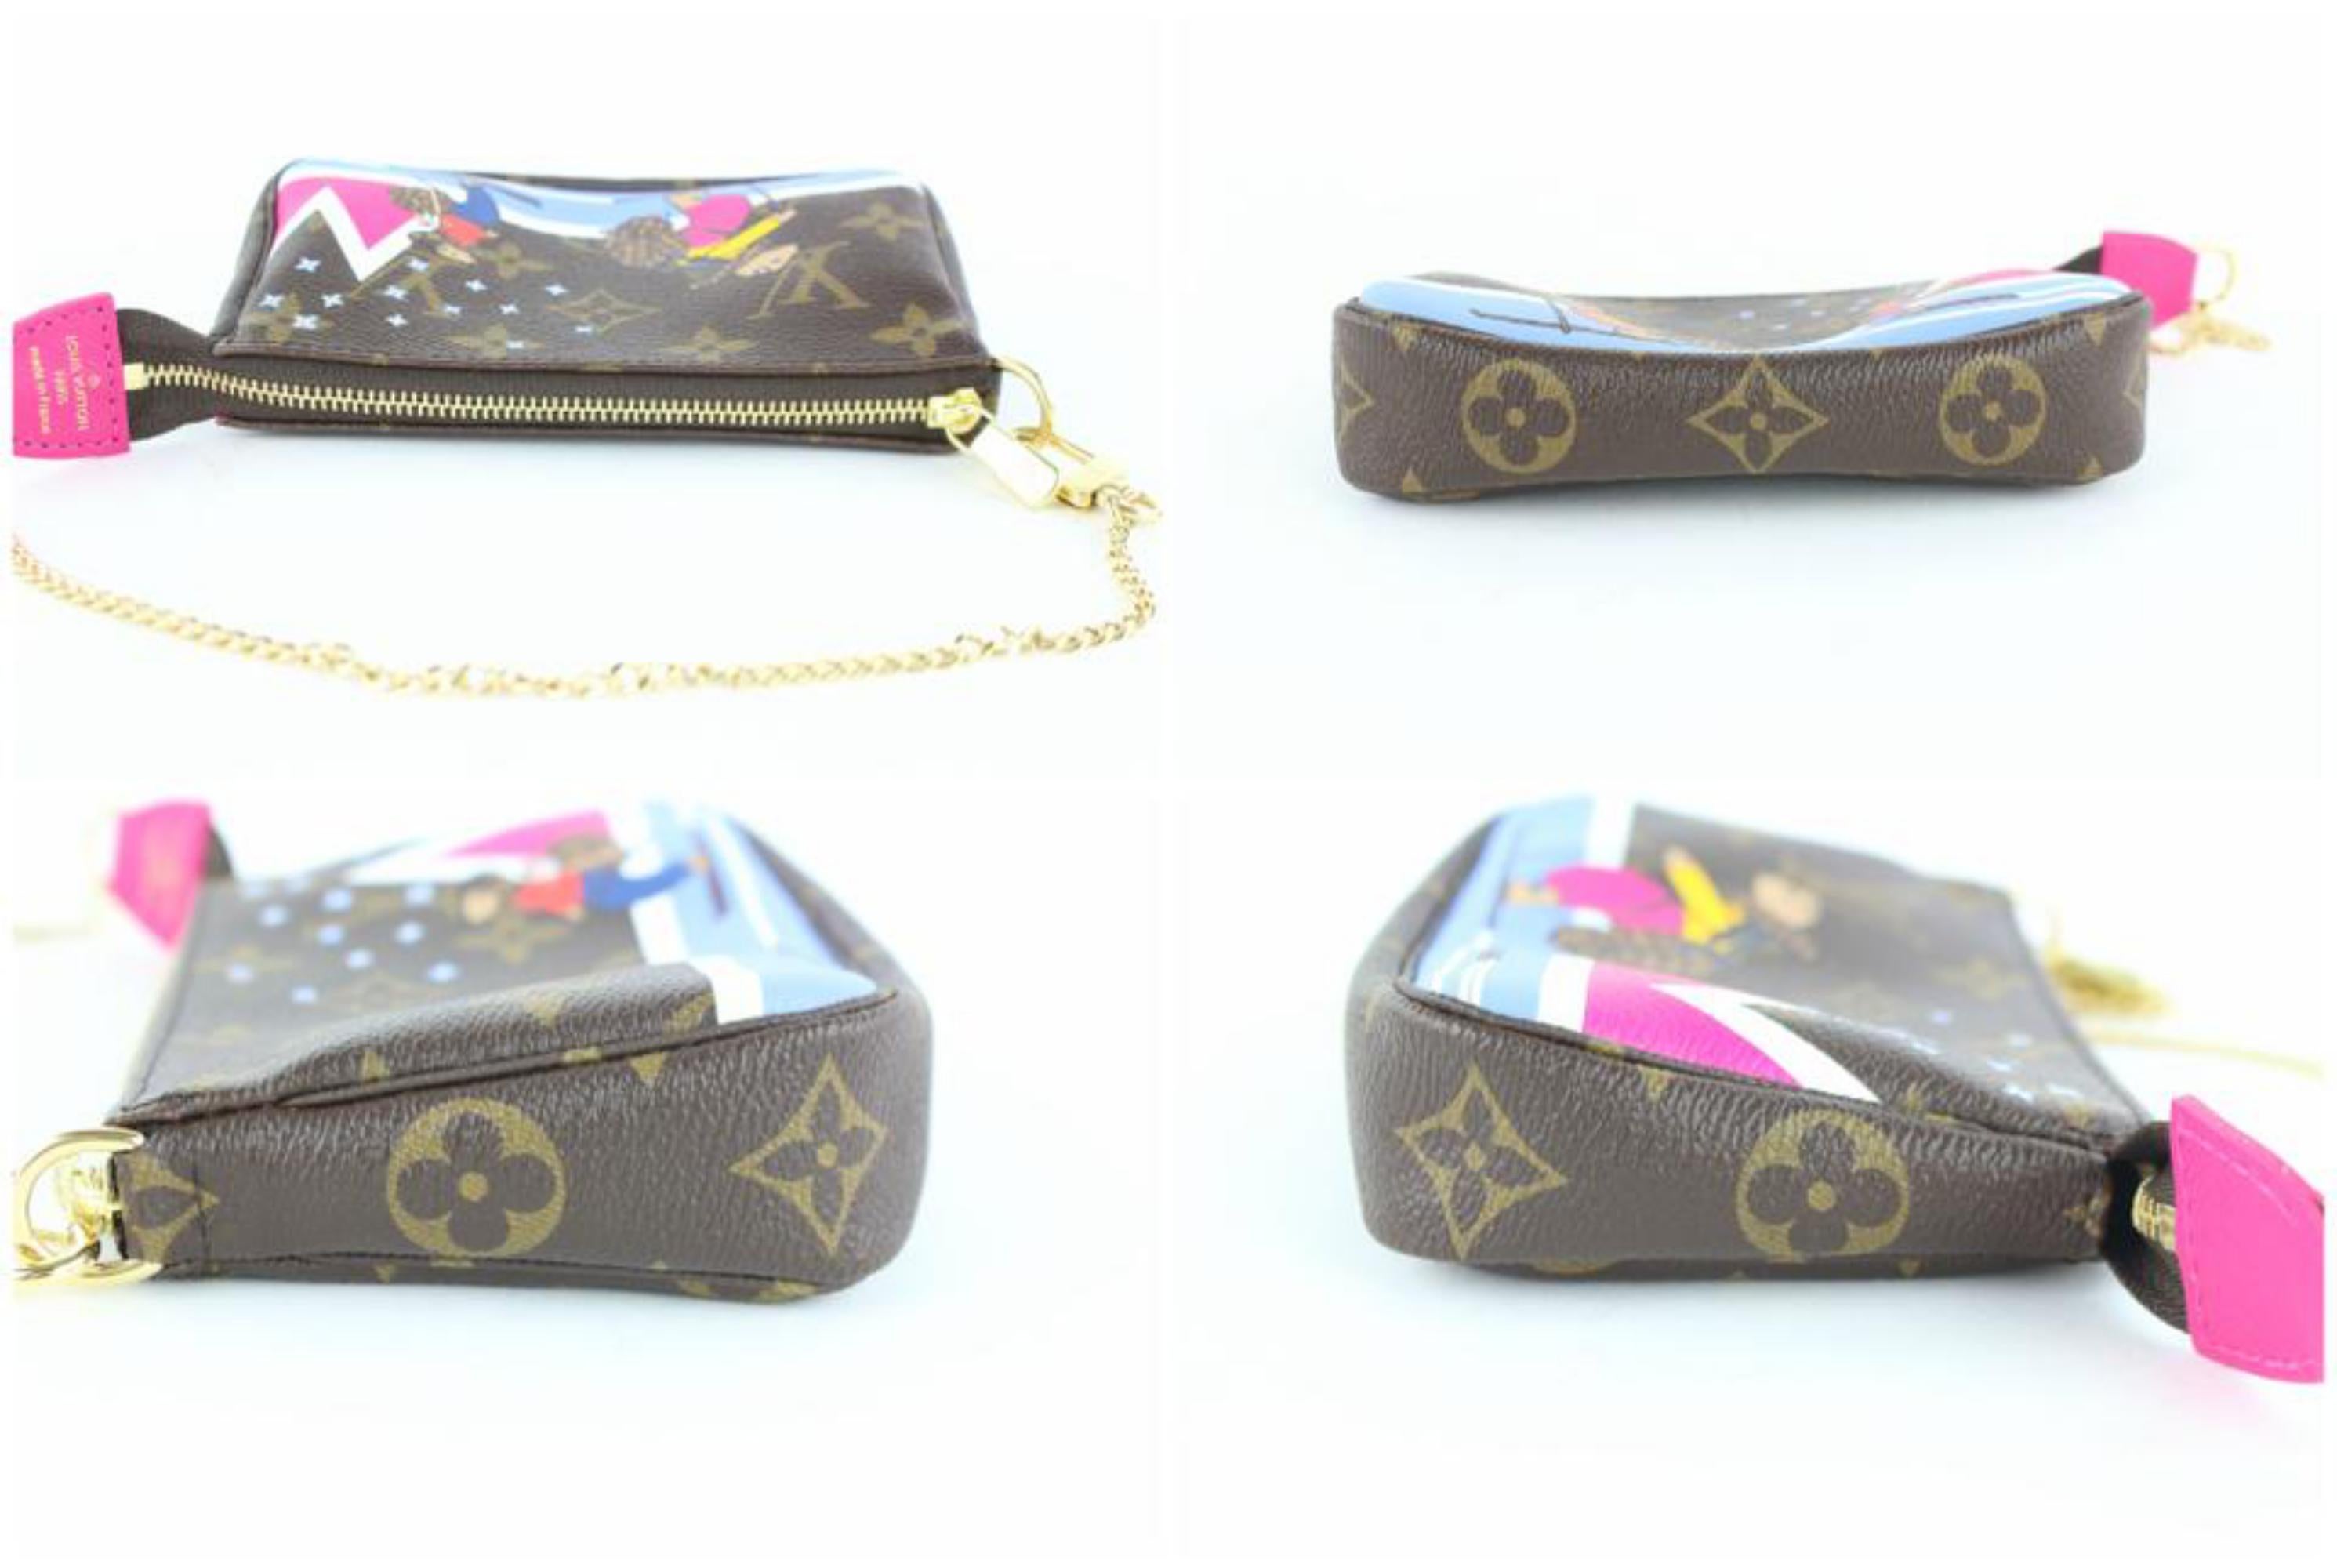 Louis Vuitton Pochette Limited Ski Polar Bear Pink Mini Accesoires 7lz1113  In New Condition For Sale In Forest Hills, NY